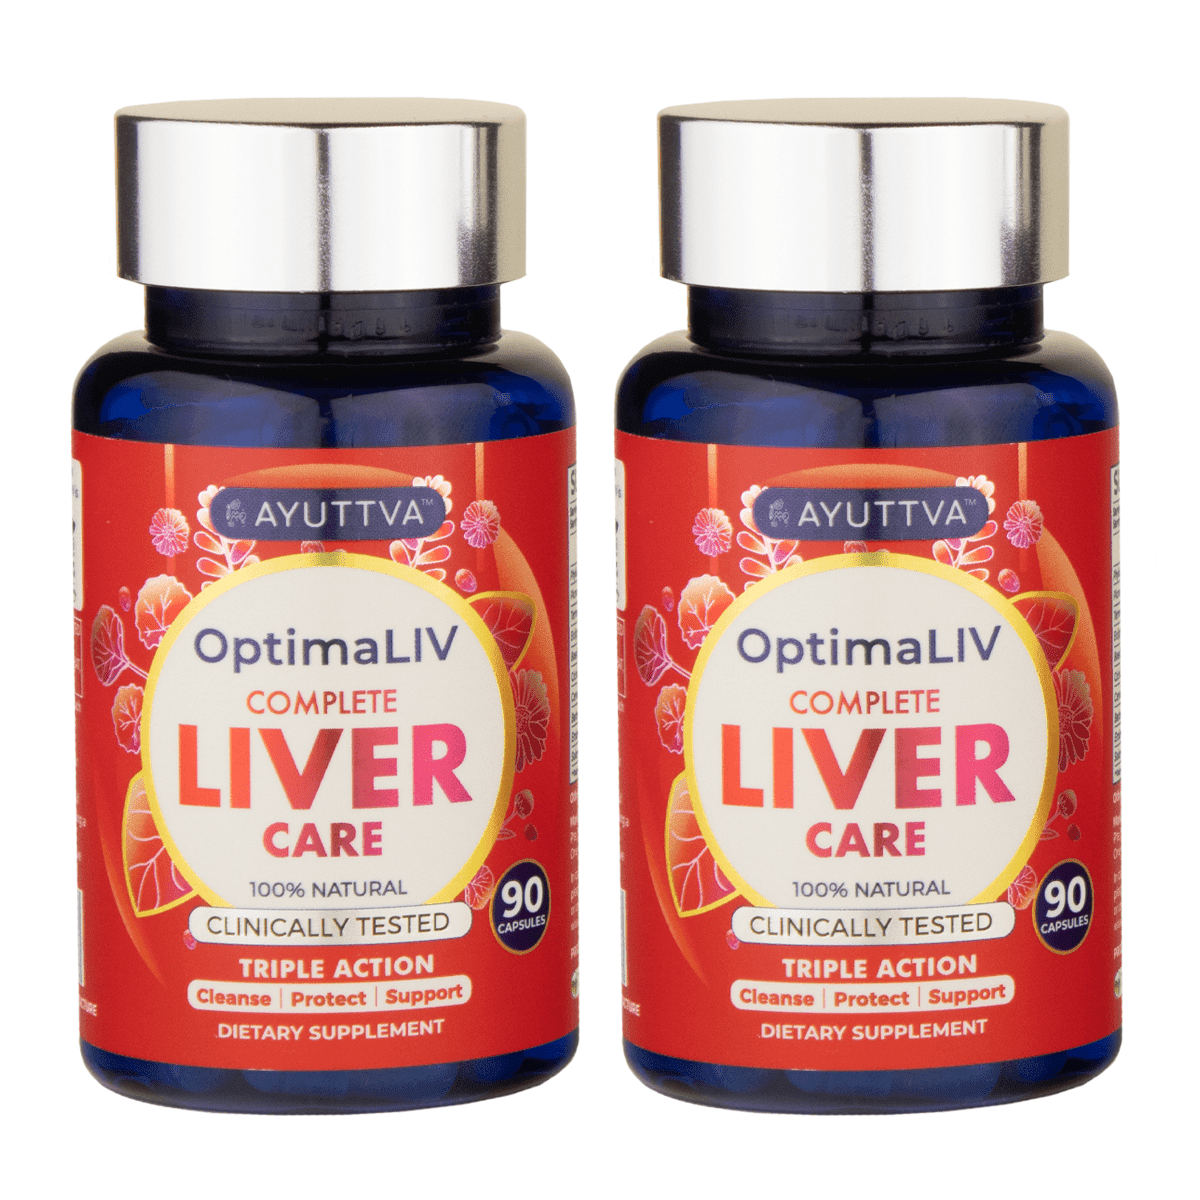 OptimaLIV : Clinically Tested, Triple-Action Ayurvedic Liver Function Supplement | Pack of 2 Supplements Ayuttva 